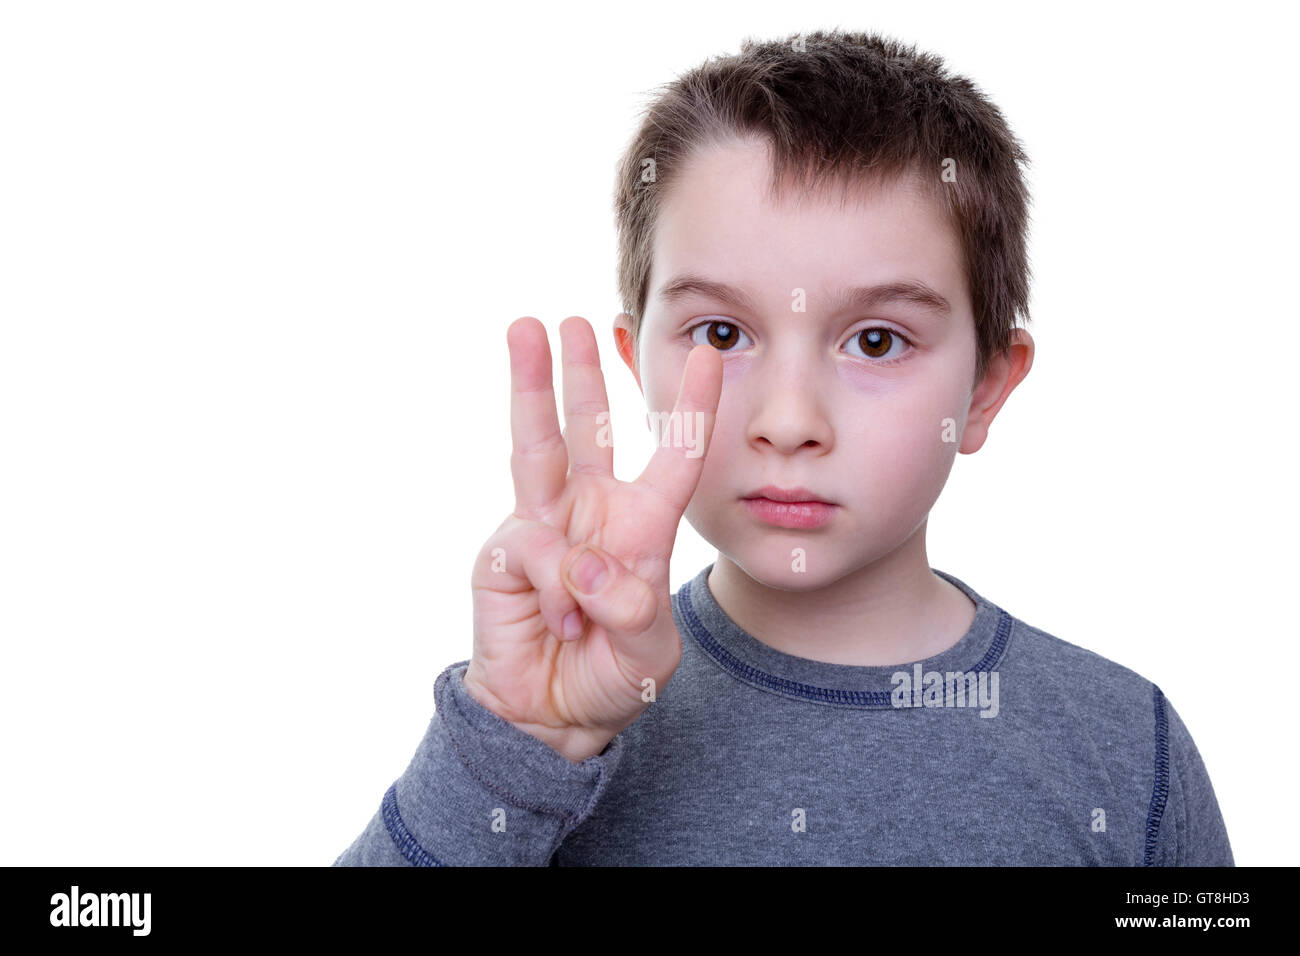 Close up of serious little boy gesturing with three fingers as if to count or display a symbol Stock Photo